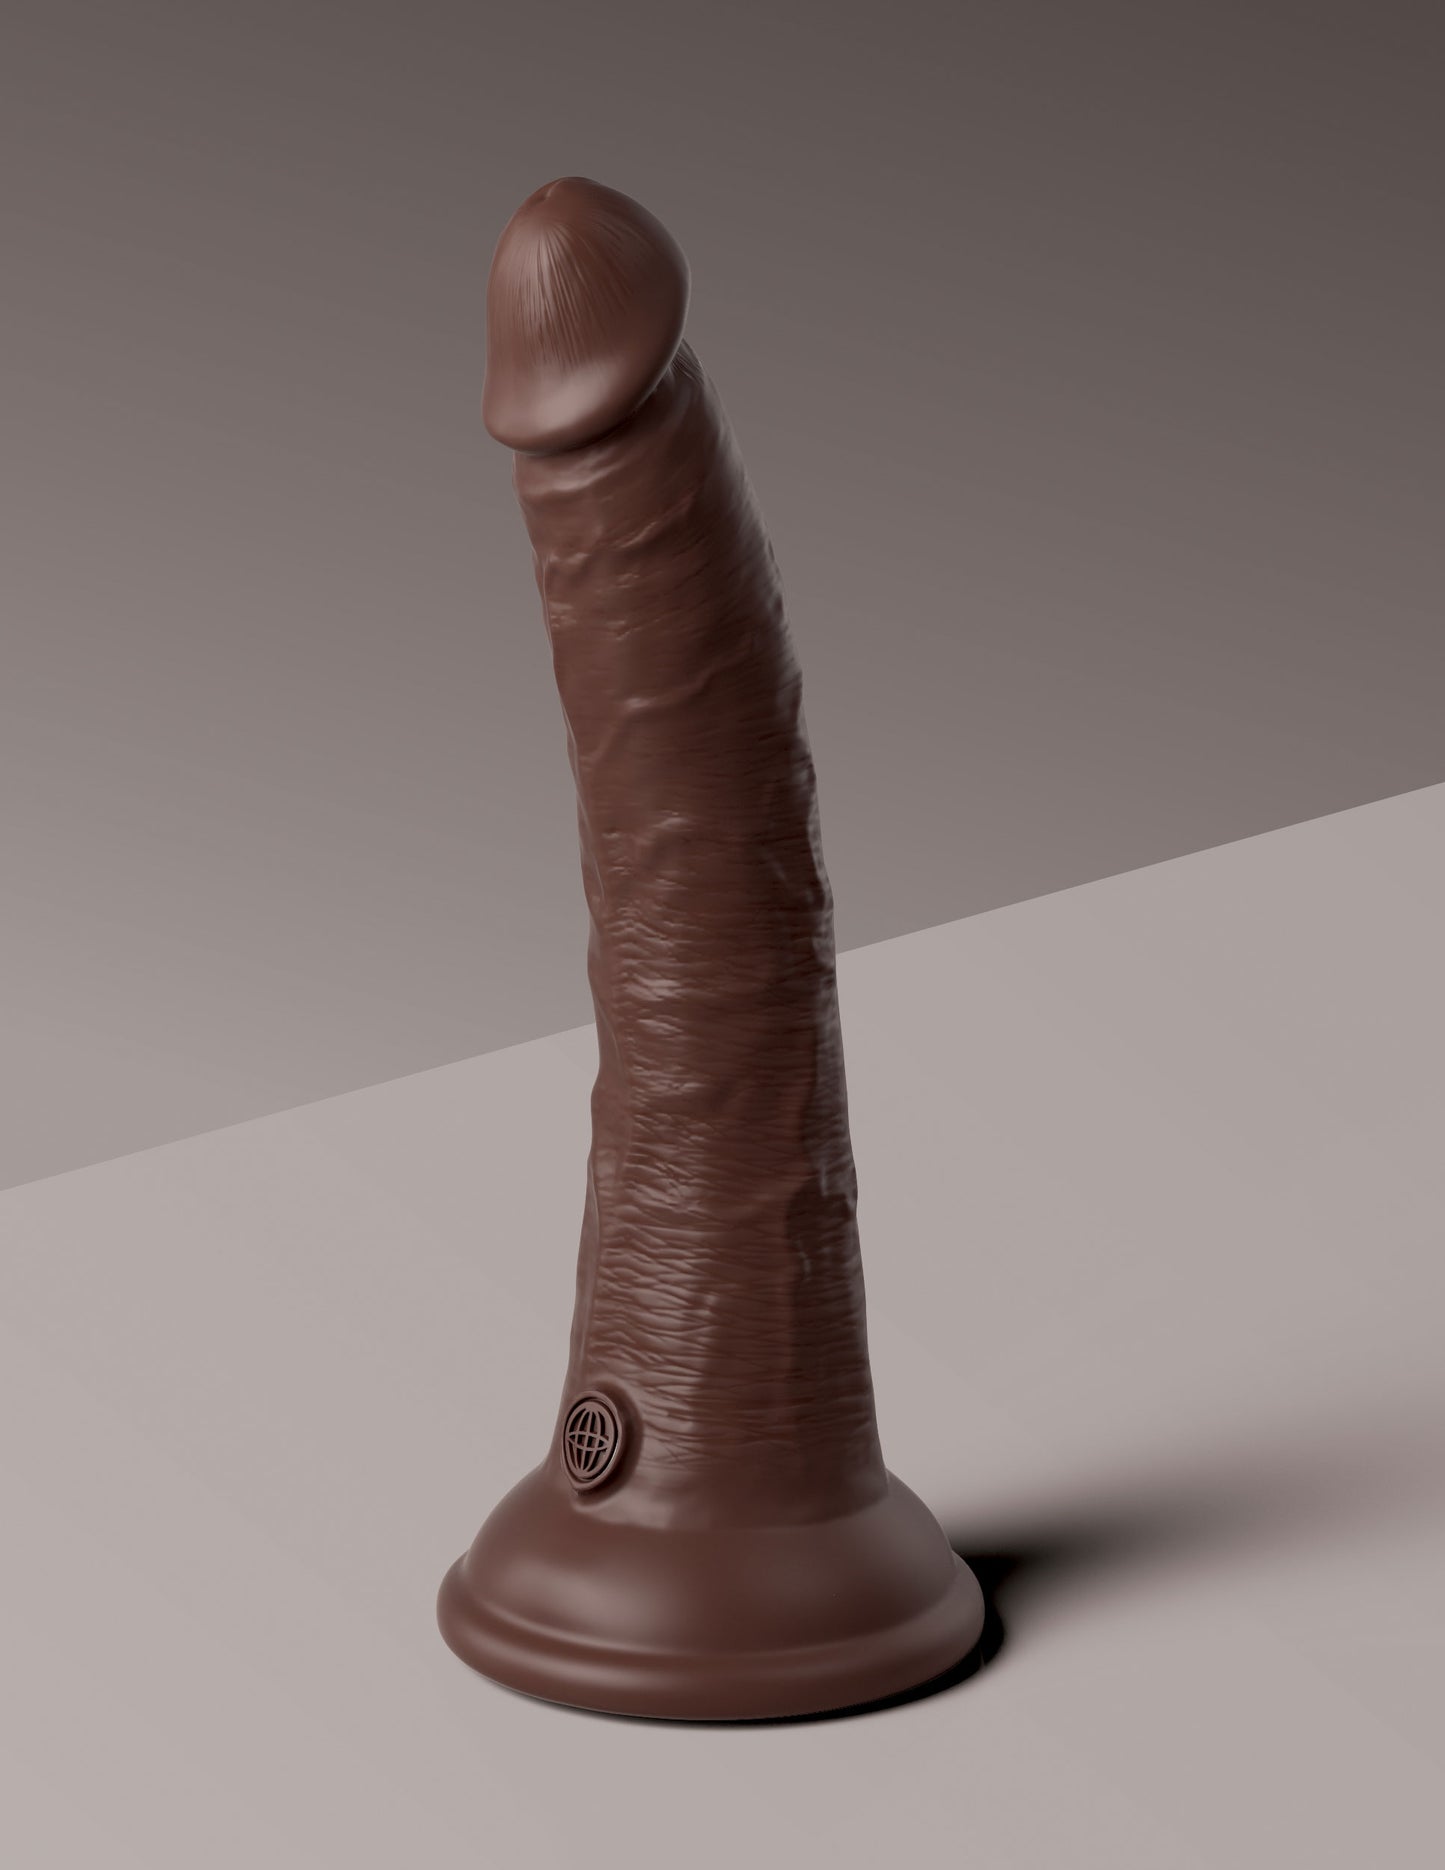 King Cock Elite 7 Inch Vibrating Silicone Dual  Silicone Dual Density Cock With Remote - Brown